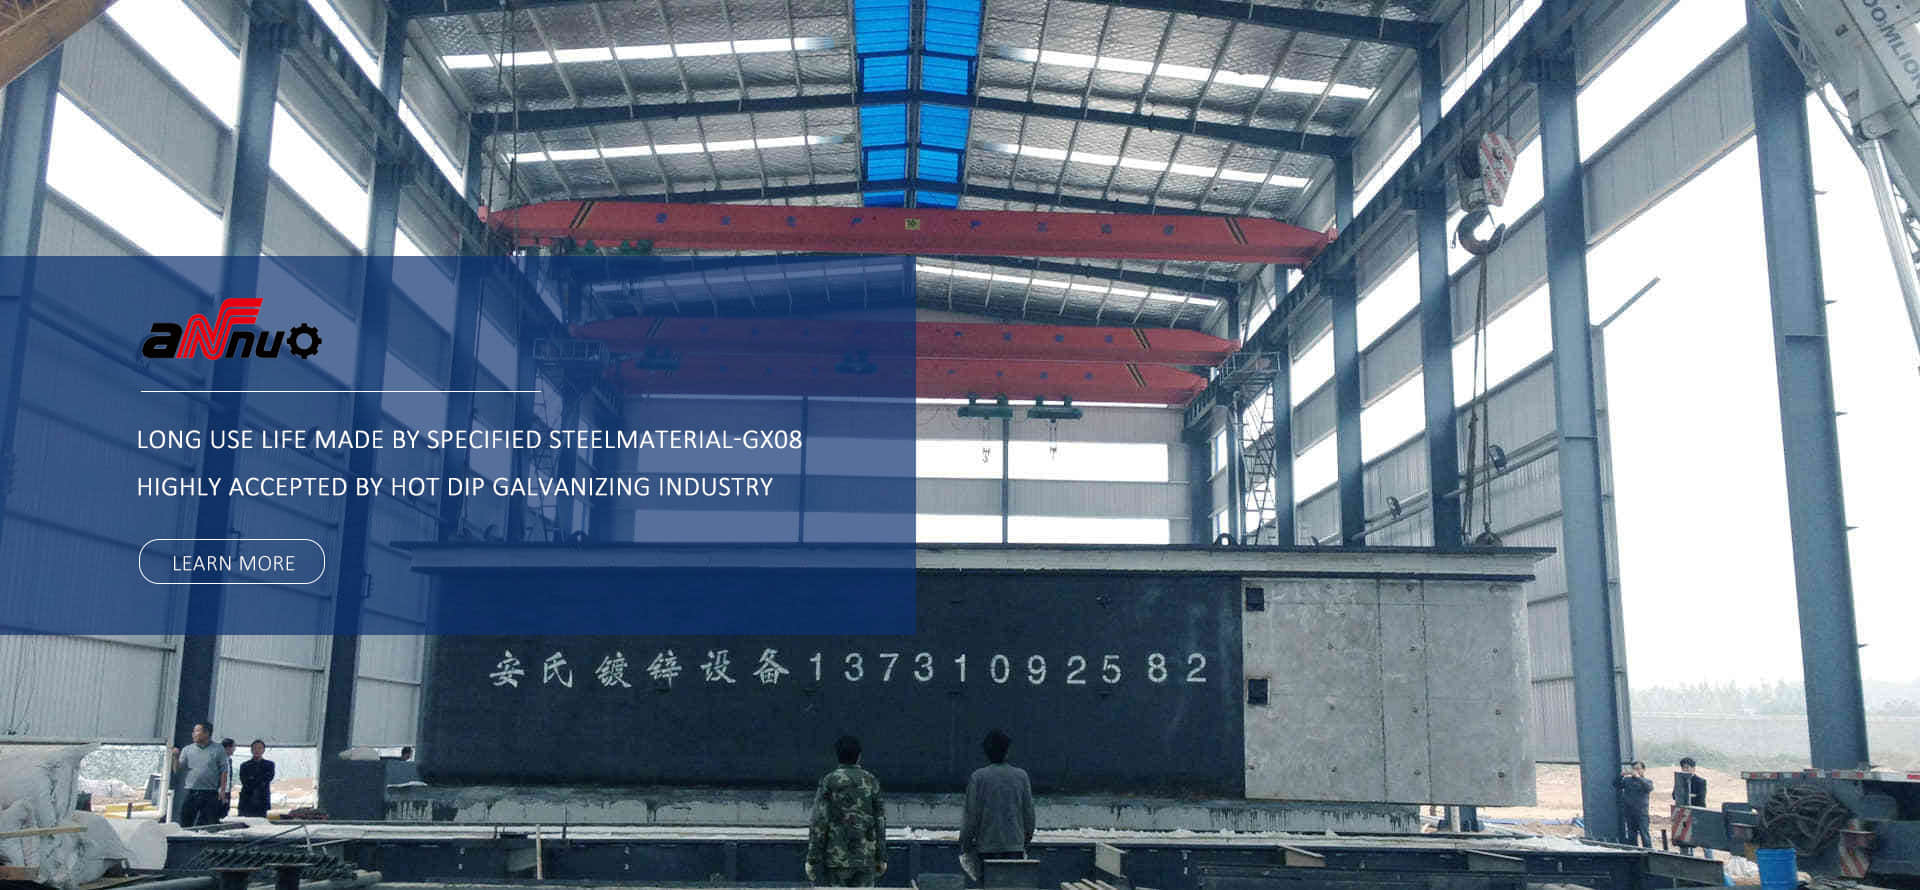 Long use life made by Specified Steel material-GX08 highly accepted by hot dip Galvanizing Industry